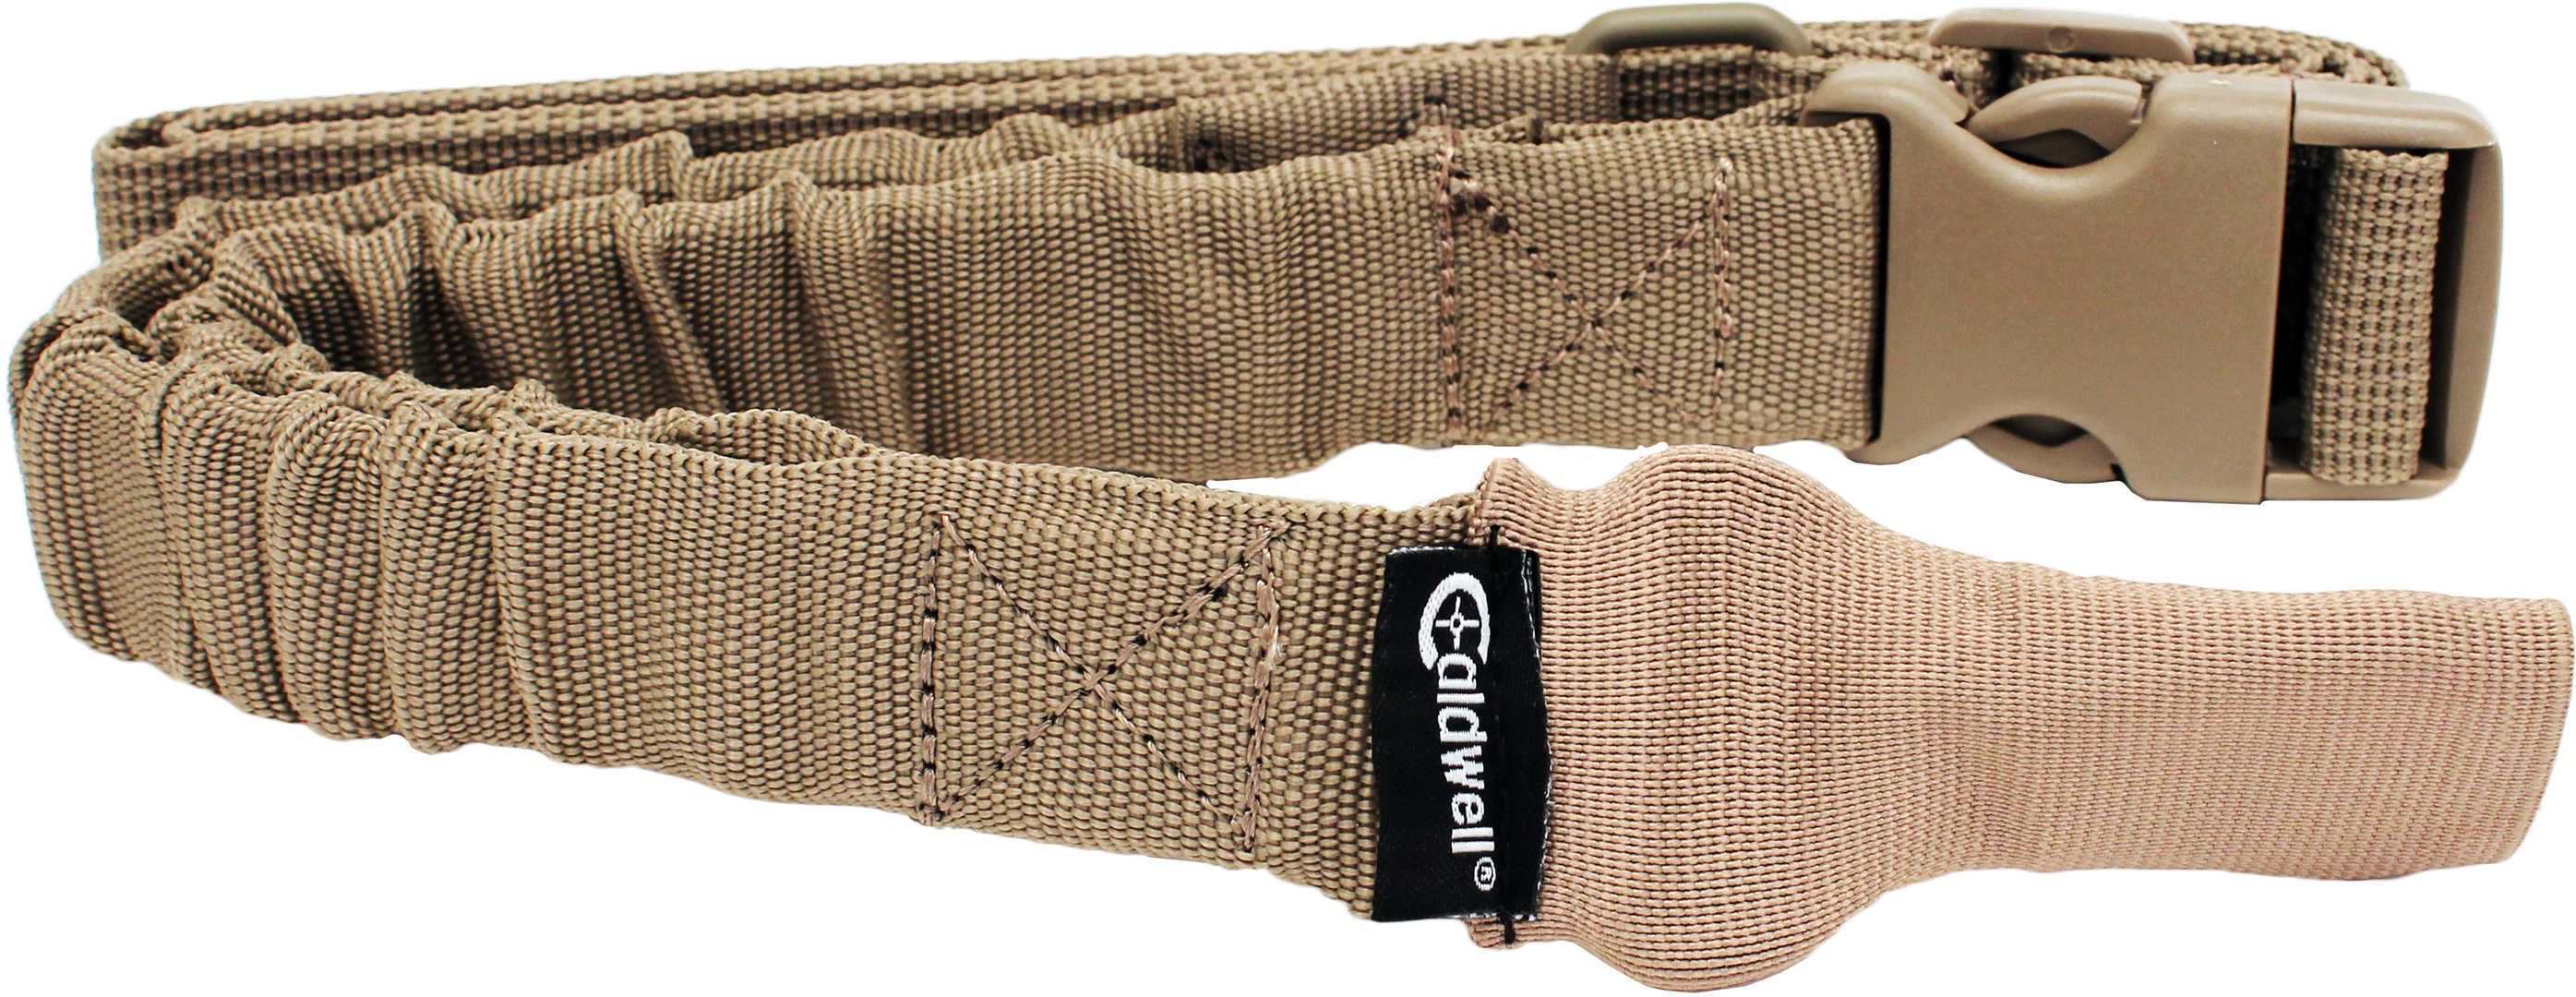 Caldwell Single Point Tactical Sling, Flat Dark Earth Md: 390662